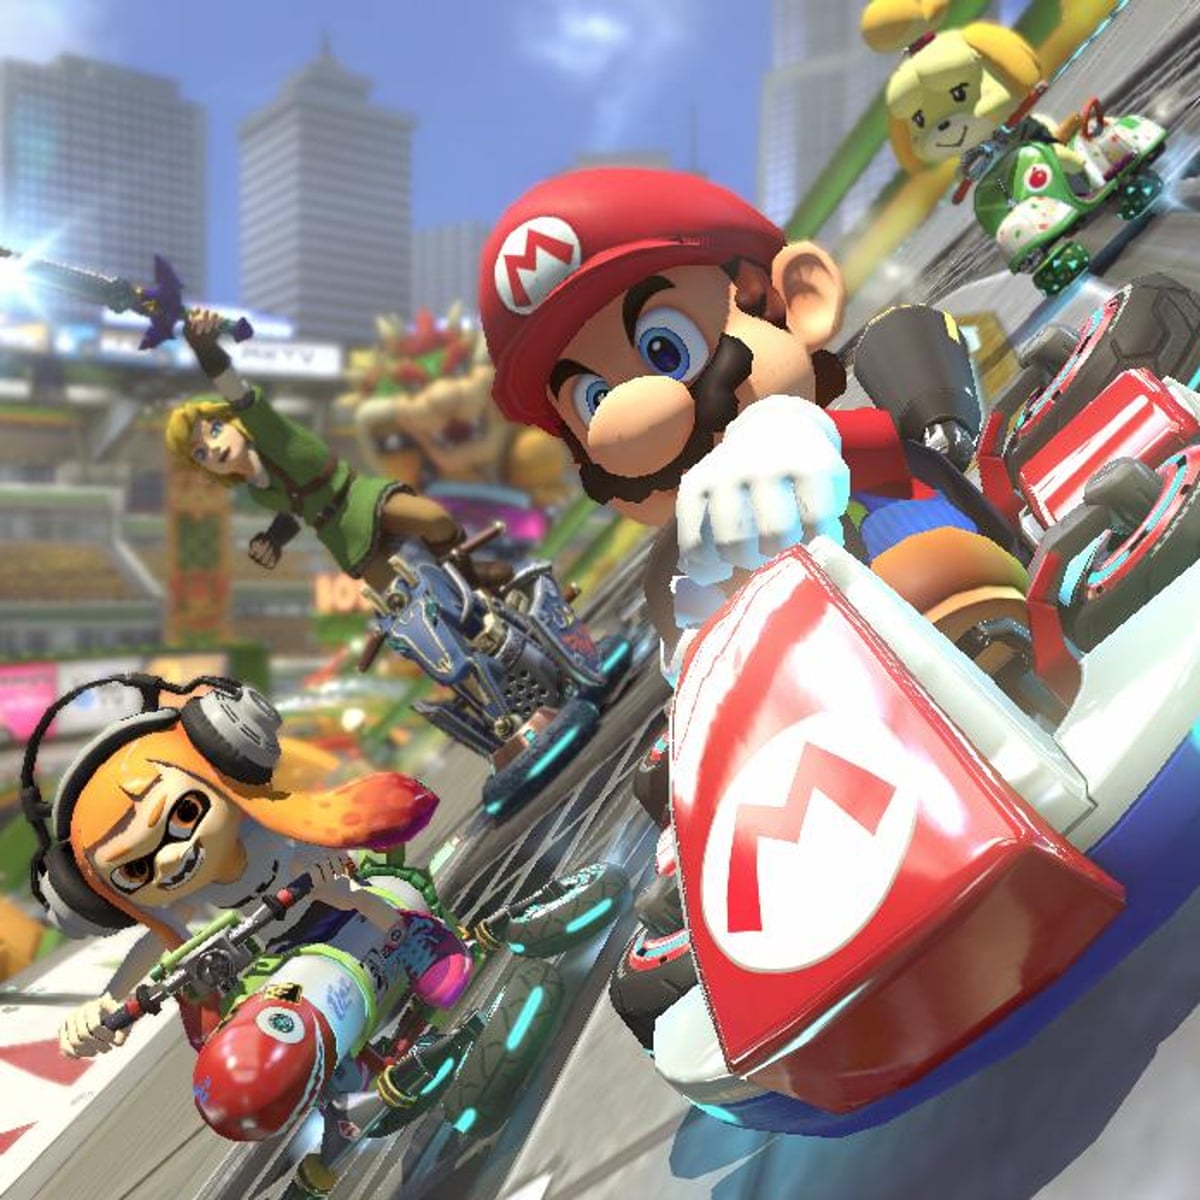 Mario Kart 8 Deluxe review: the best, most versatile game in the